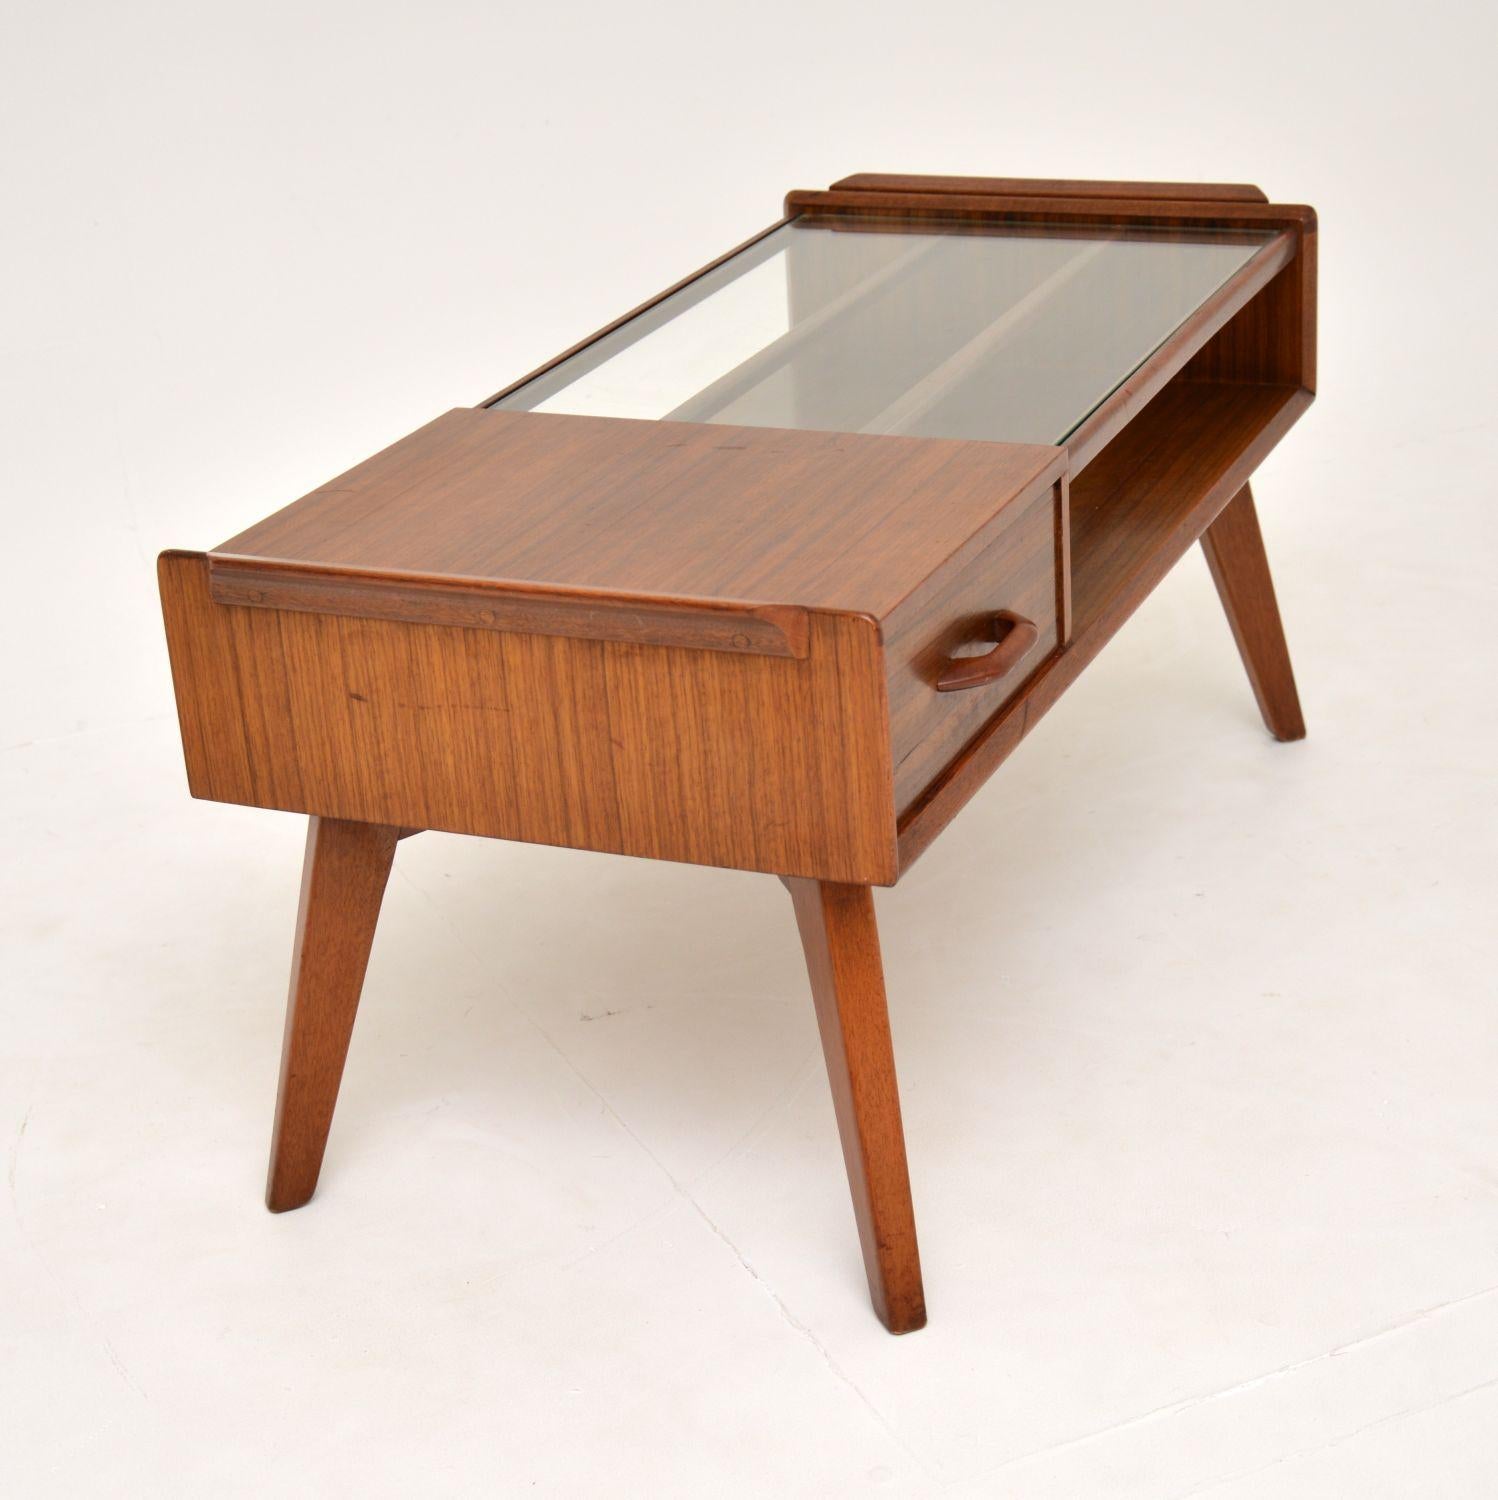 English 1950s Vintage Tola Coffee Table by G- Plan